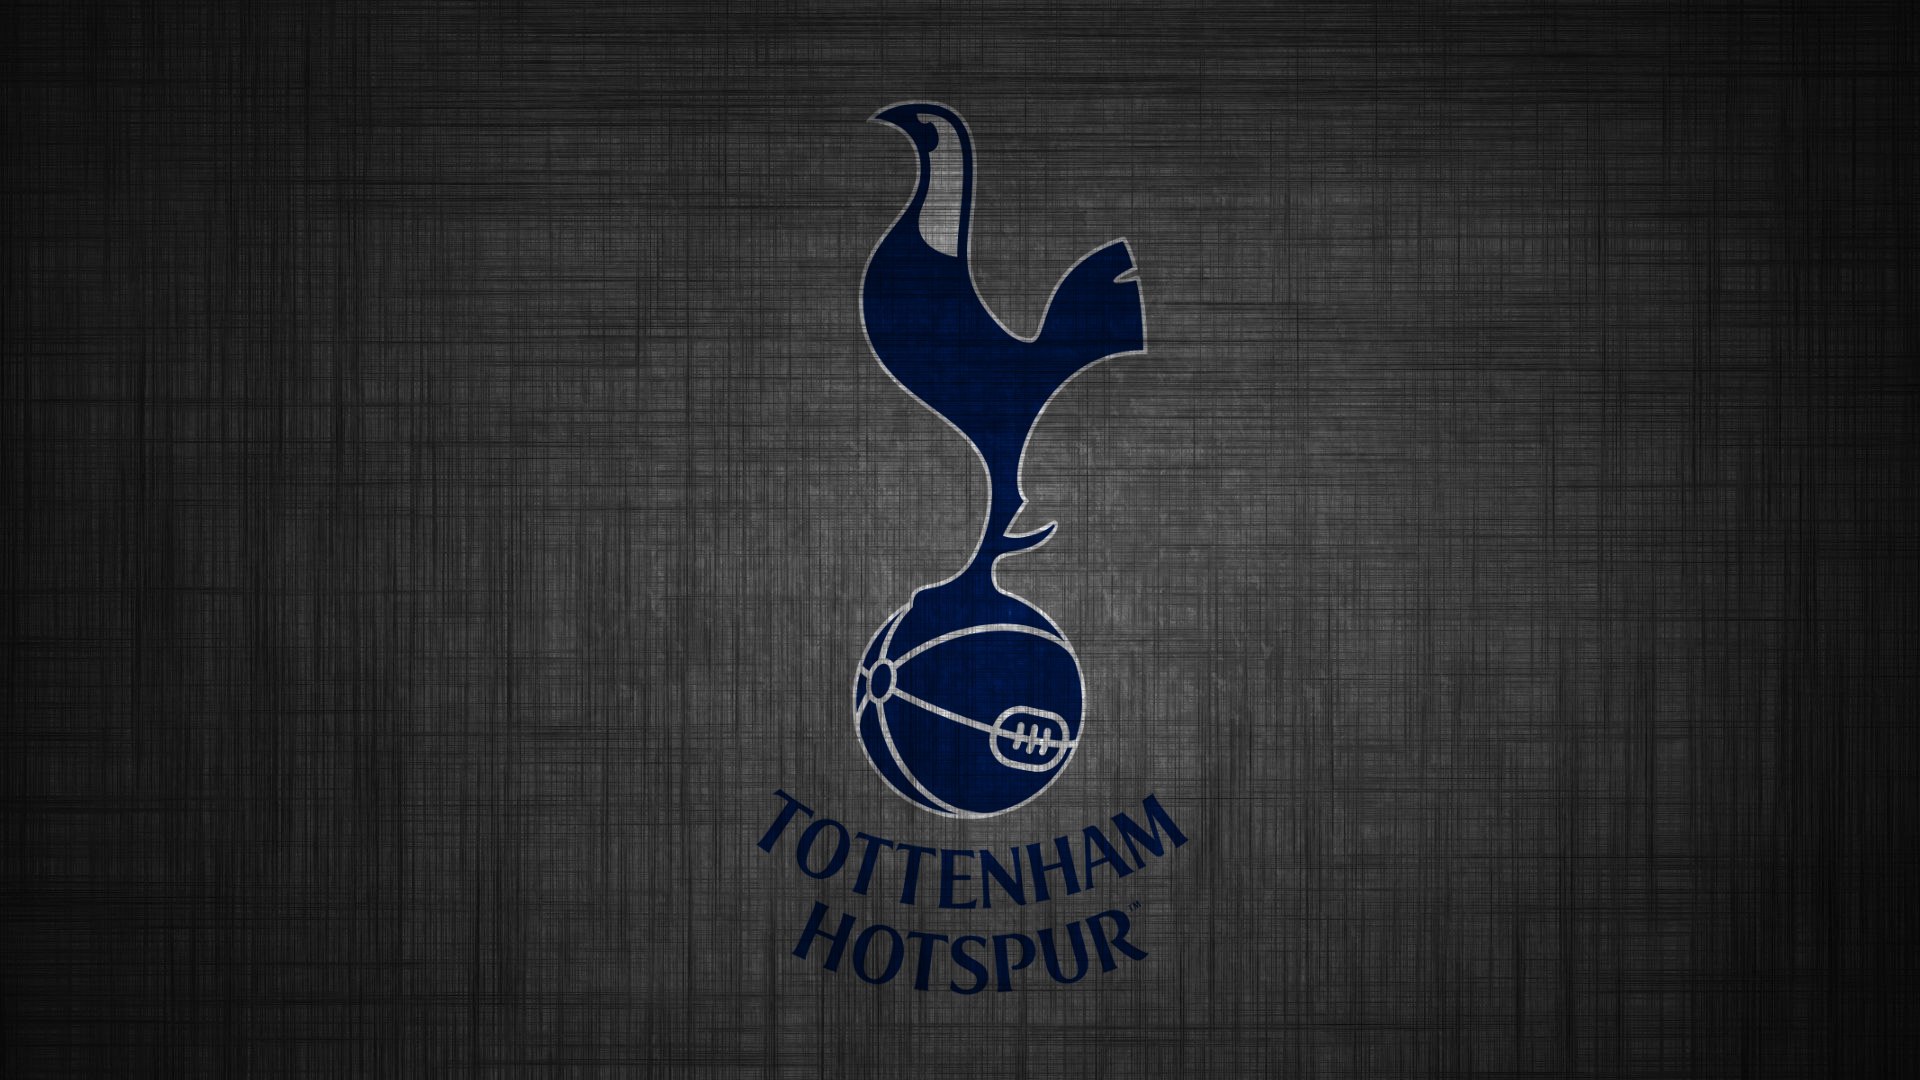 Tottenham Hotspur Wallpapers Images Photos Pictures Backgrounds